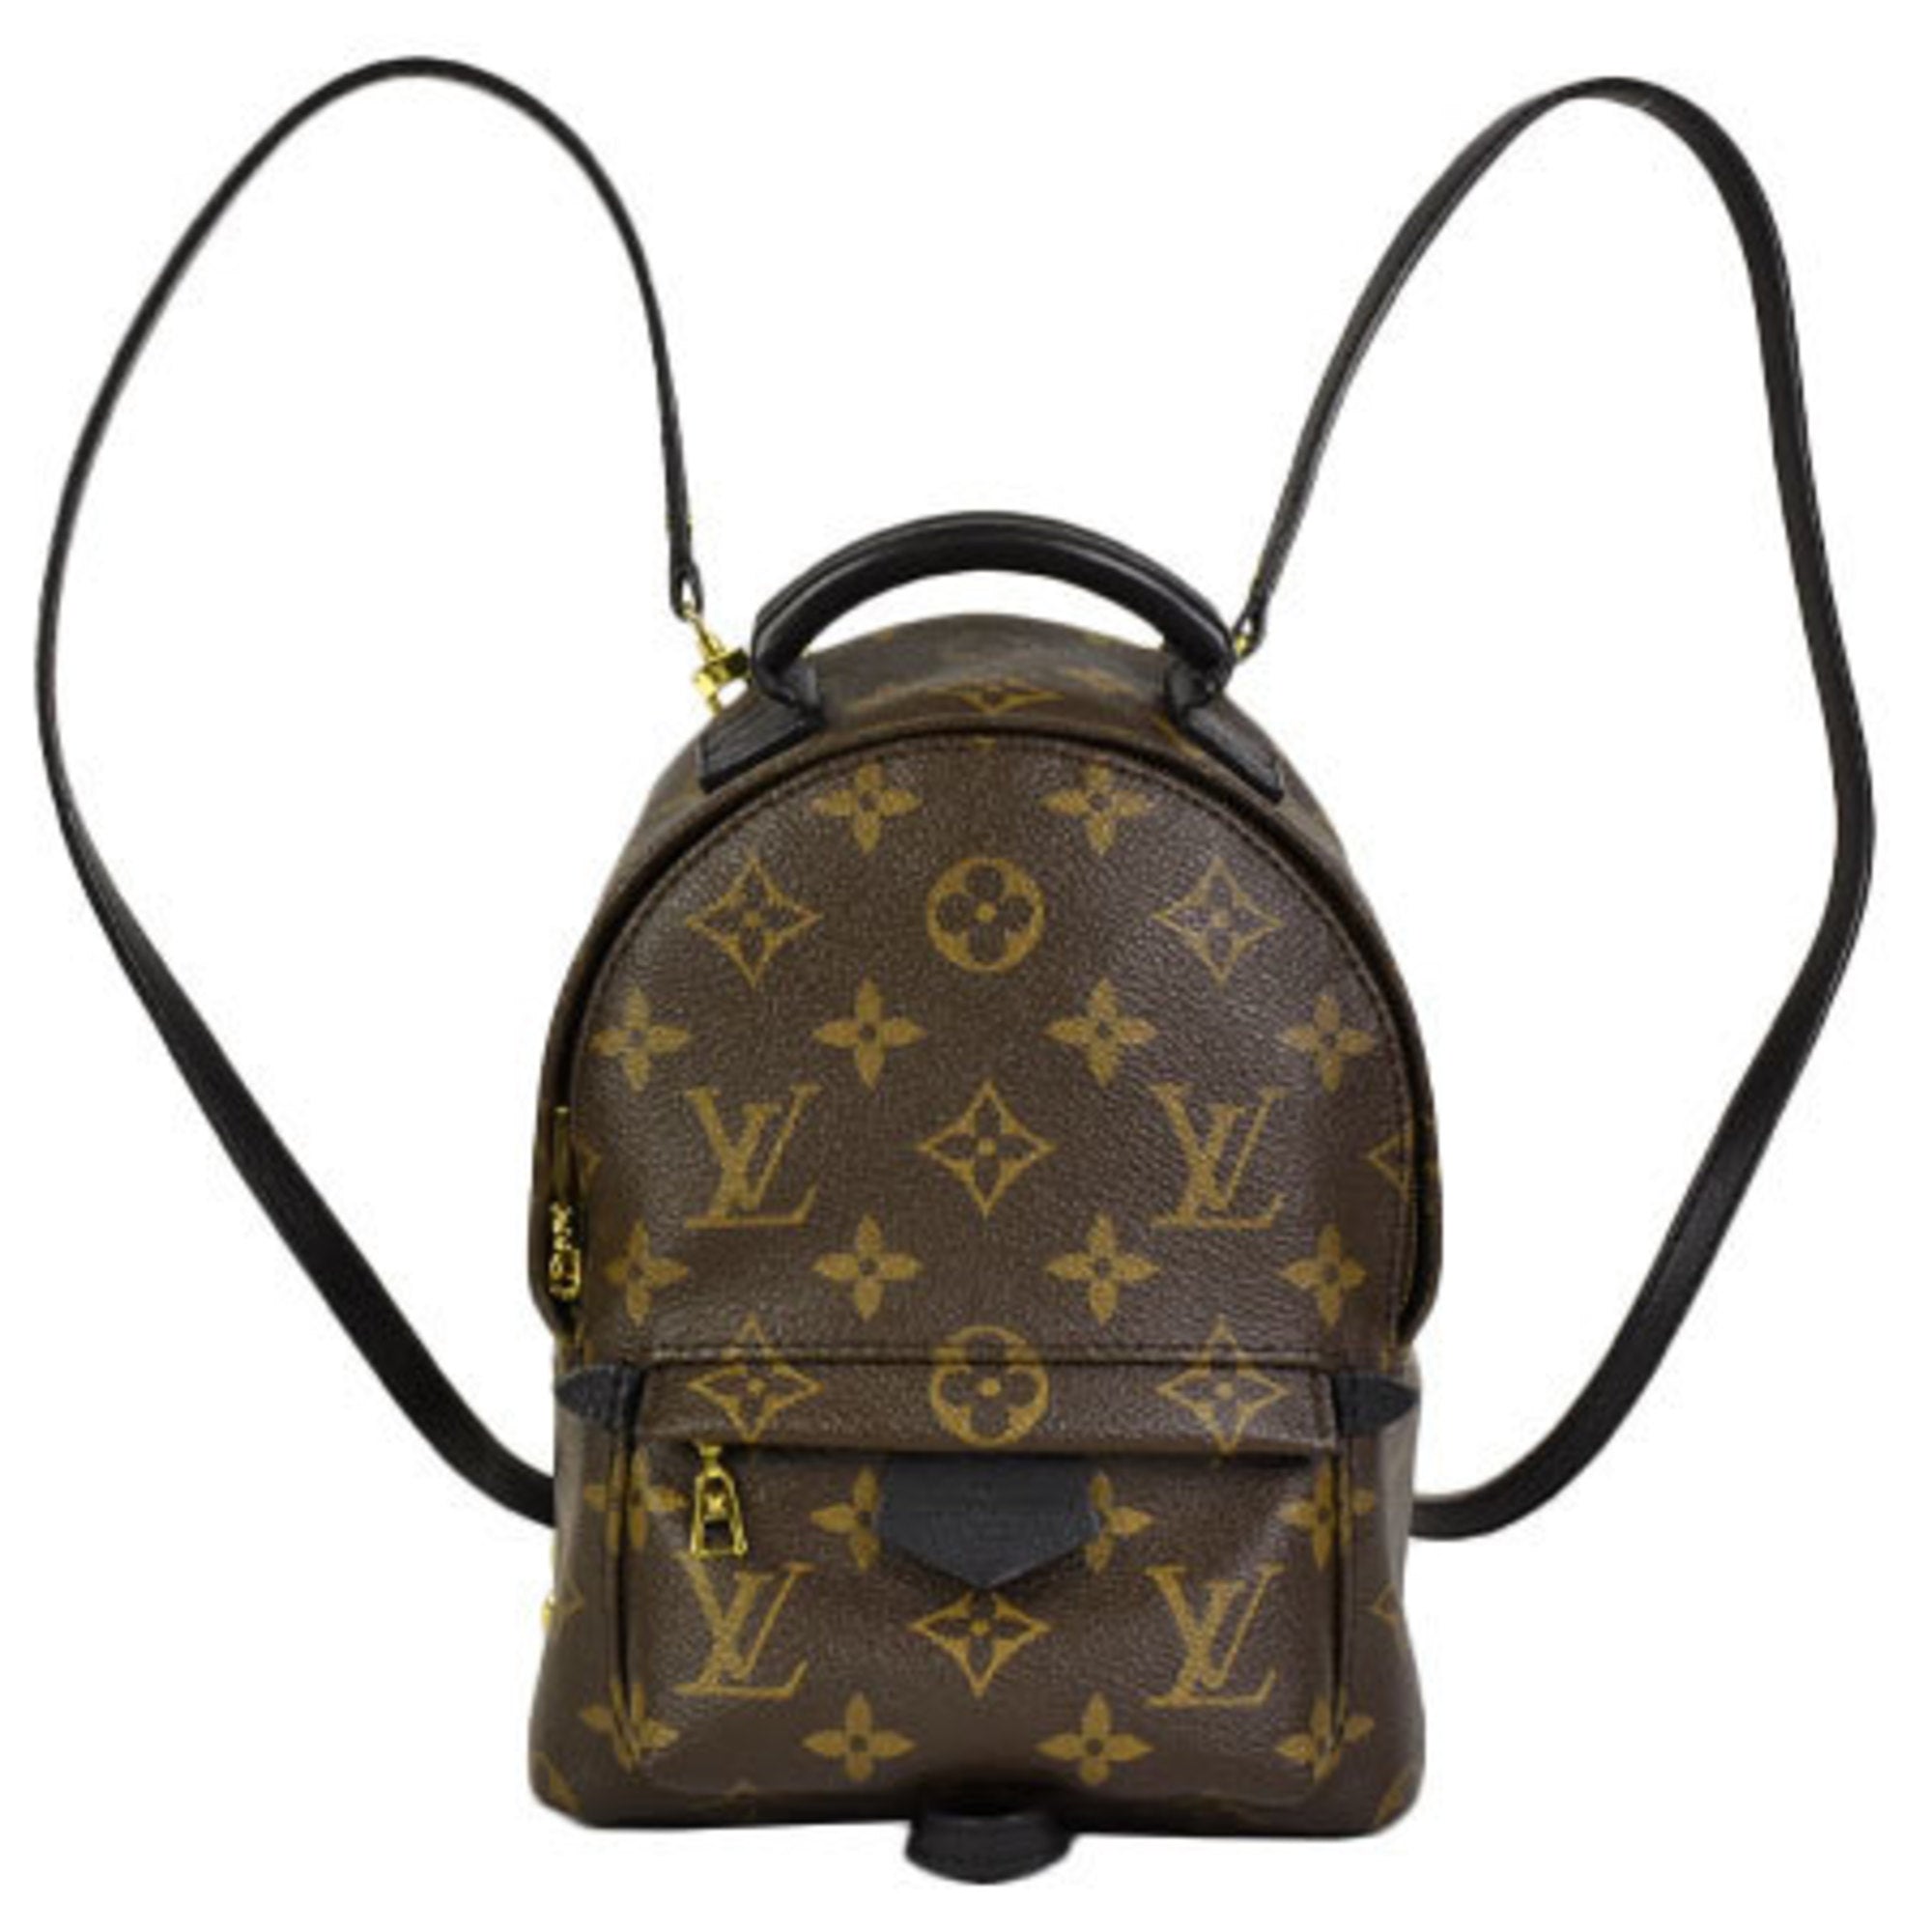 The Louis Vuitton Palm Springs Mini Backpack is the Bag of the Moment   PurseBlog